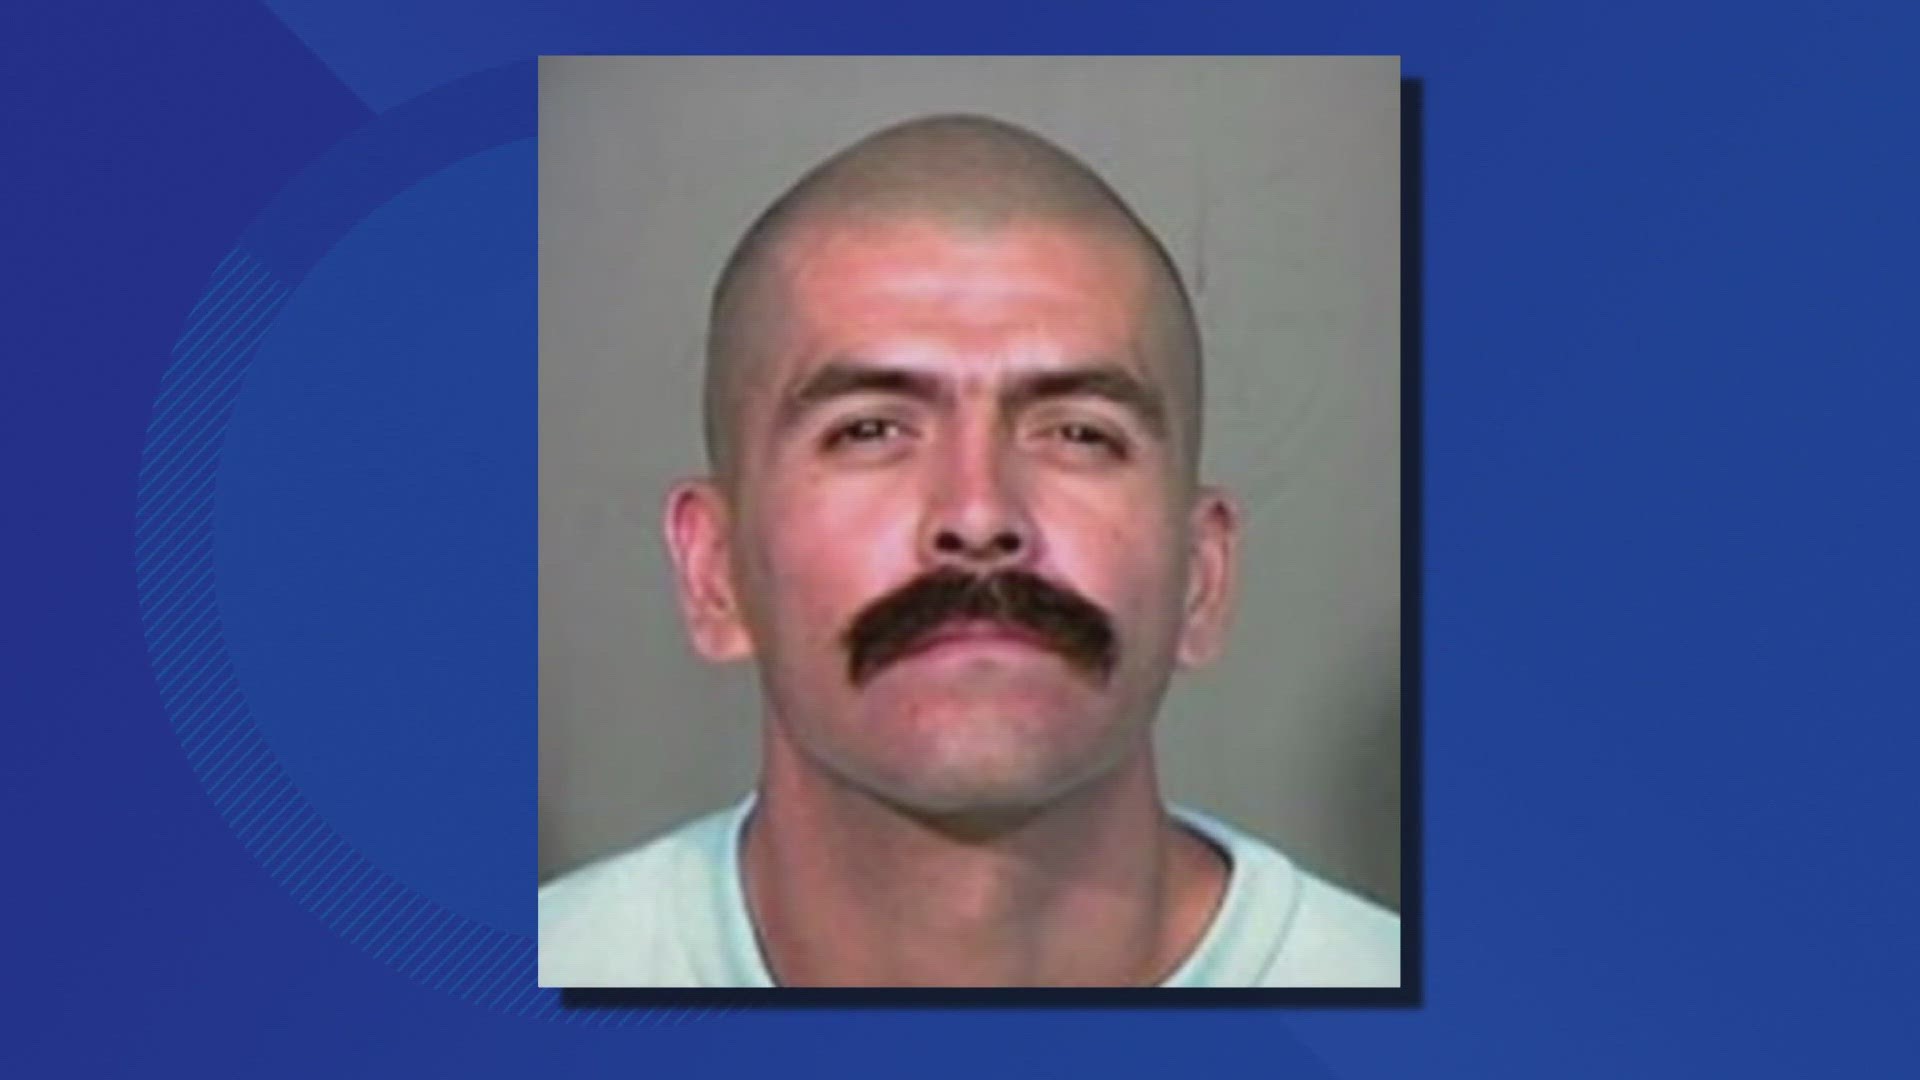 The inmate was convicted of killing Lt. Eric Shuhandler during a traffic stop in 2010.